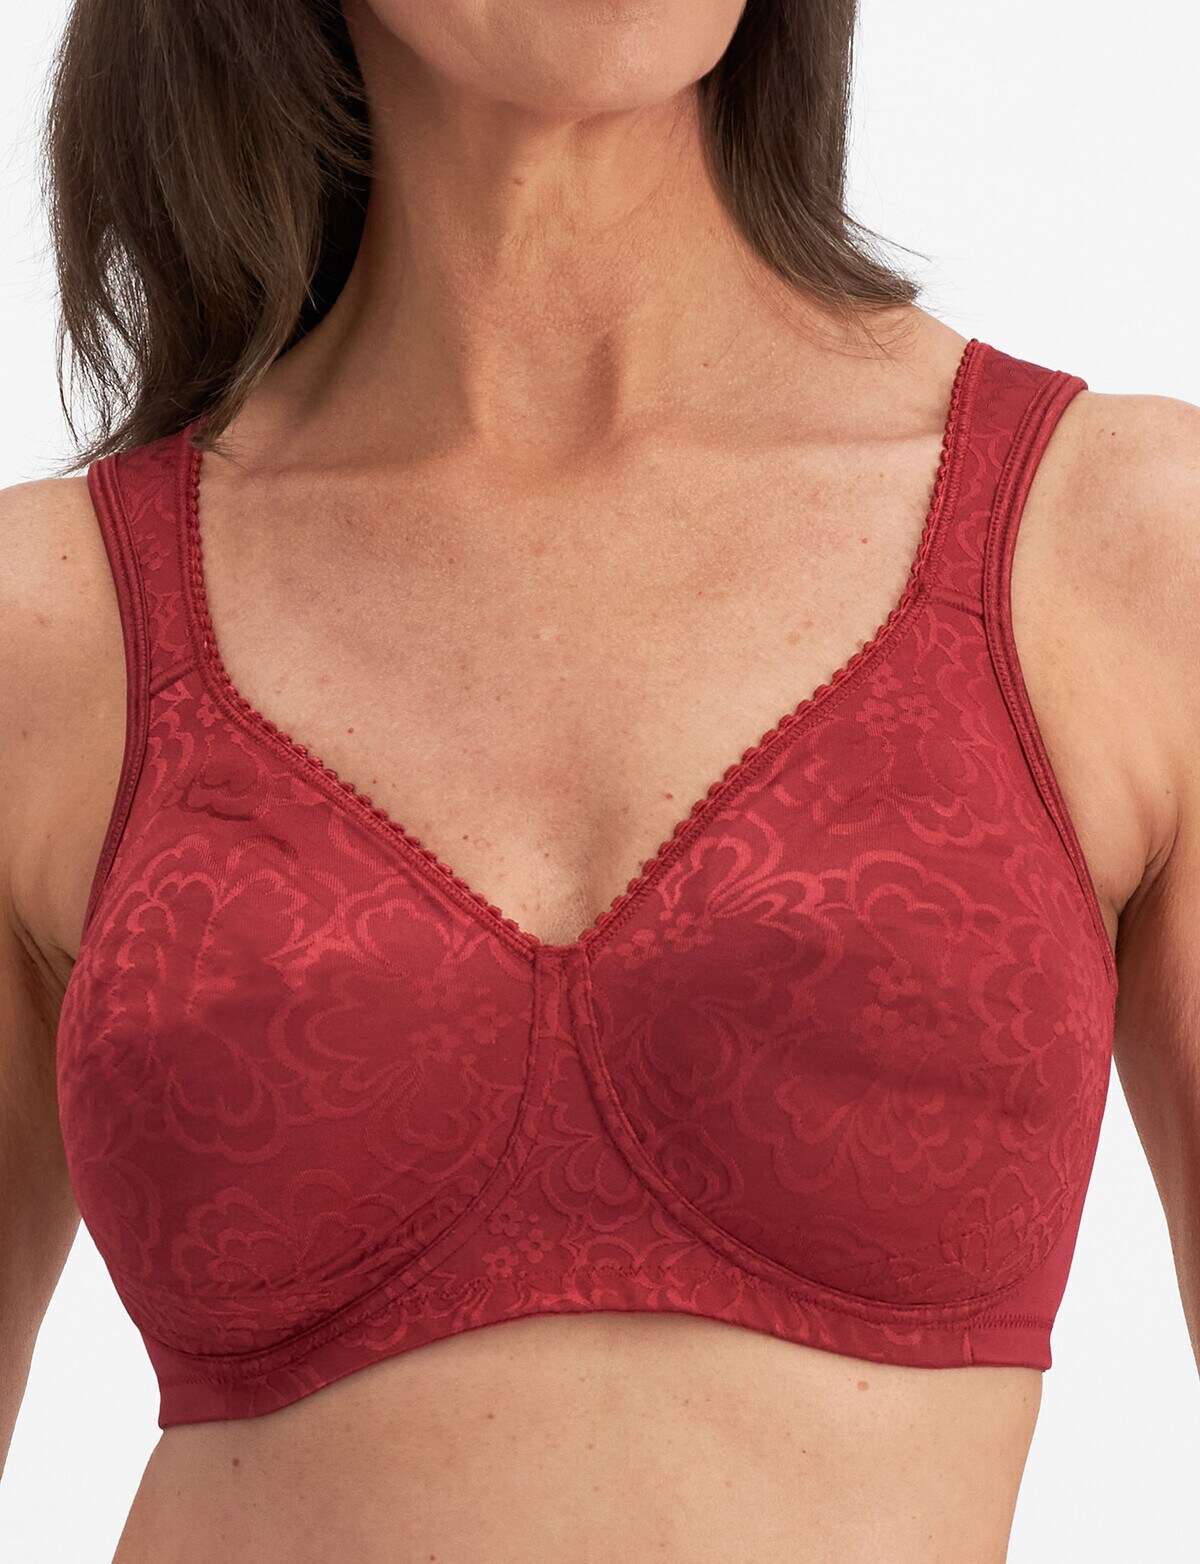 Playtex Bra size it 4d us 36d eu 80d padded underwired Red